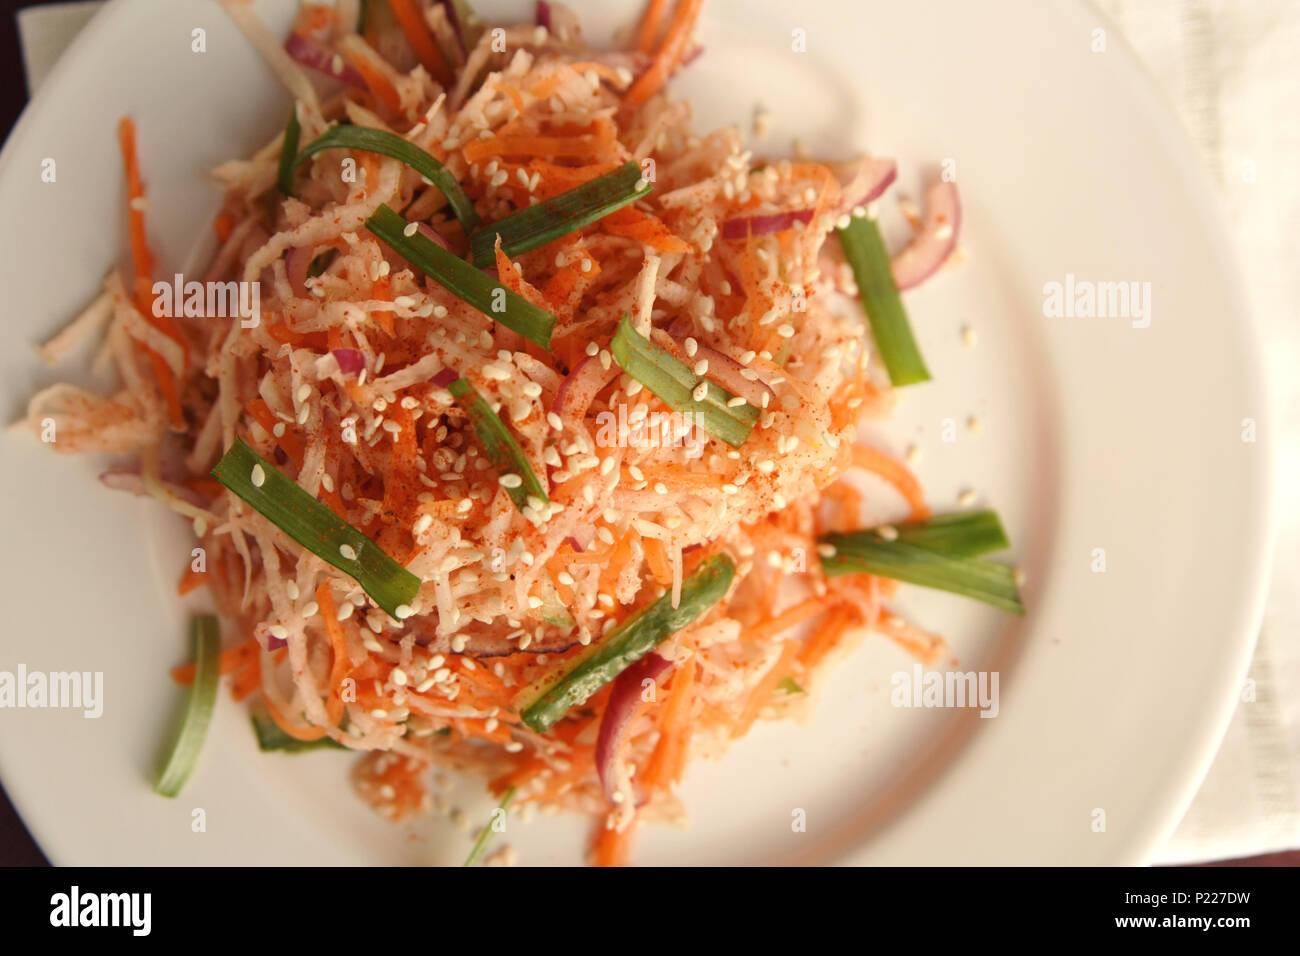 Vegan salad with carrot and radish. Asian cuisine. Healthy vegetarian appetizer on the round plate. Side dish. Simple low calories lunch. Top view. Stock Photo